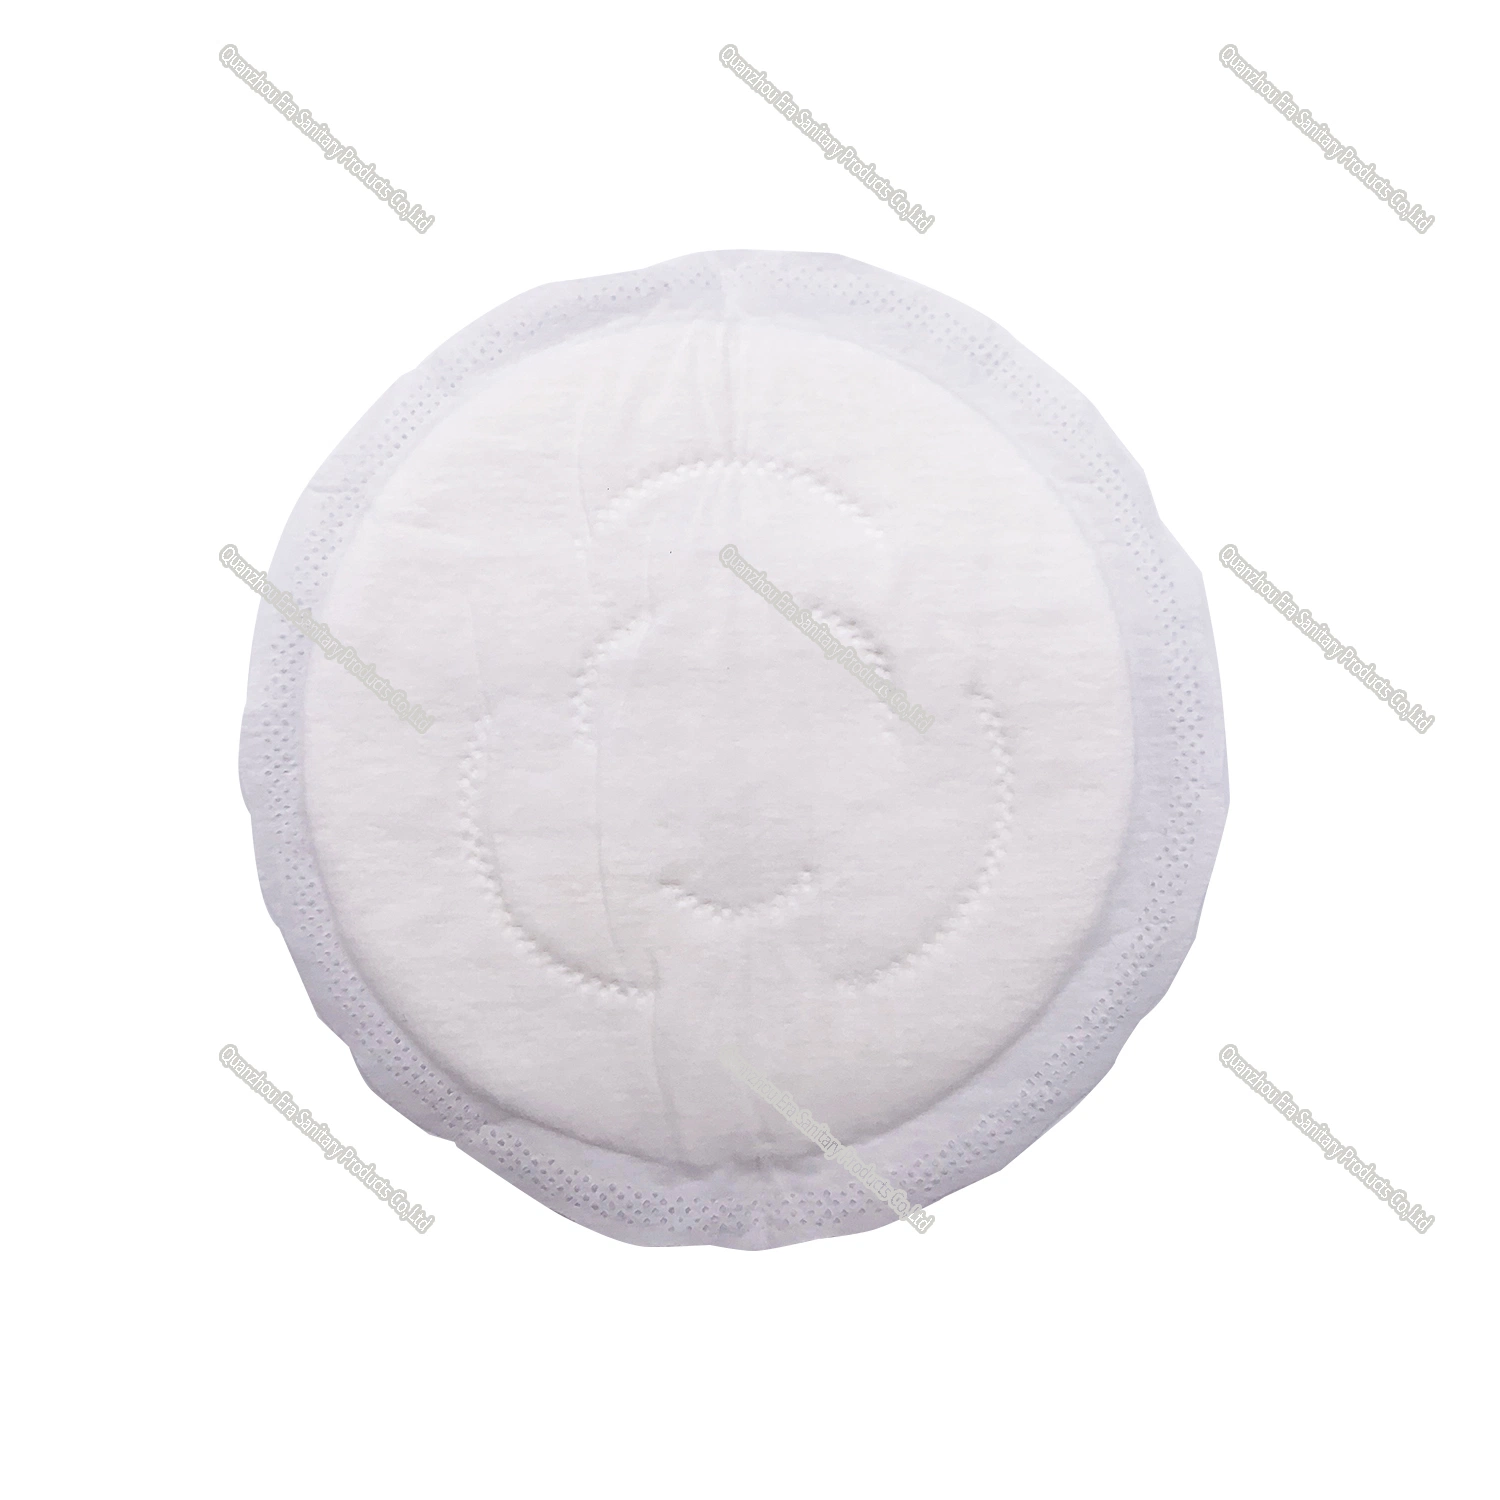 Breathable Disposable Soft Breast Pad Anti-Galactorrhea Pad